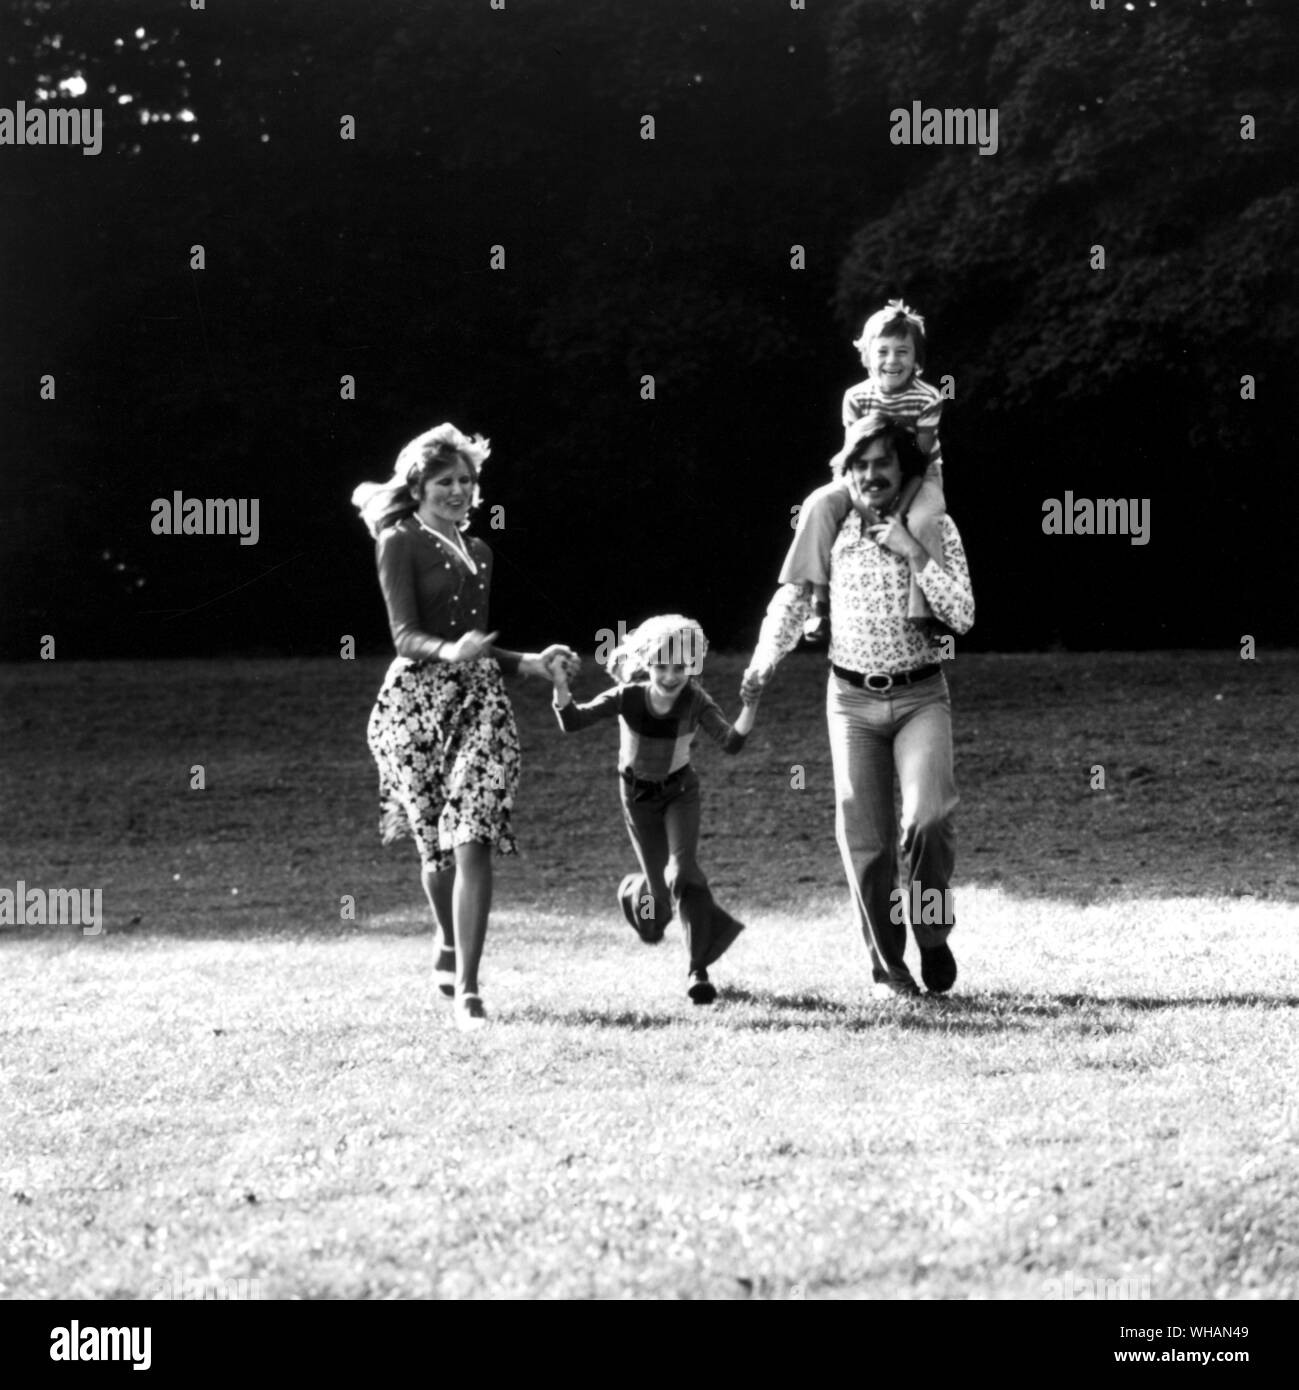 You and the family. Mother, father and two children. running, together, relaxing, fun, happy, healthy Stock Photo